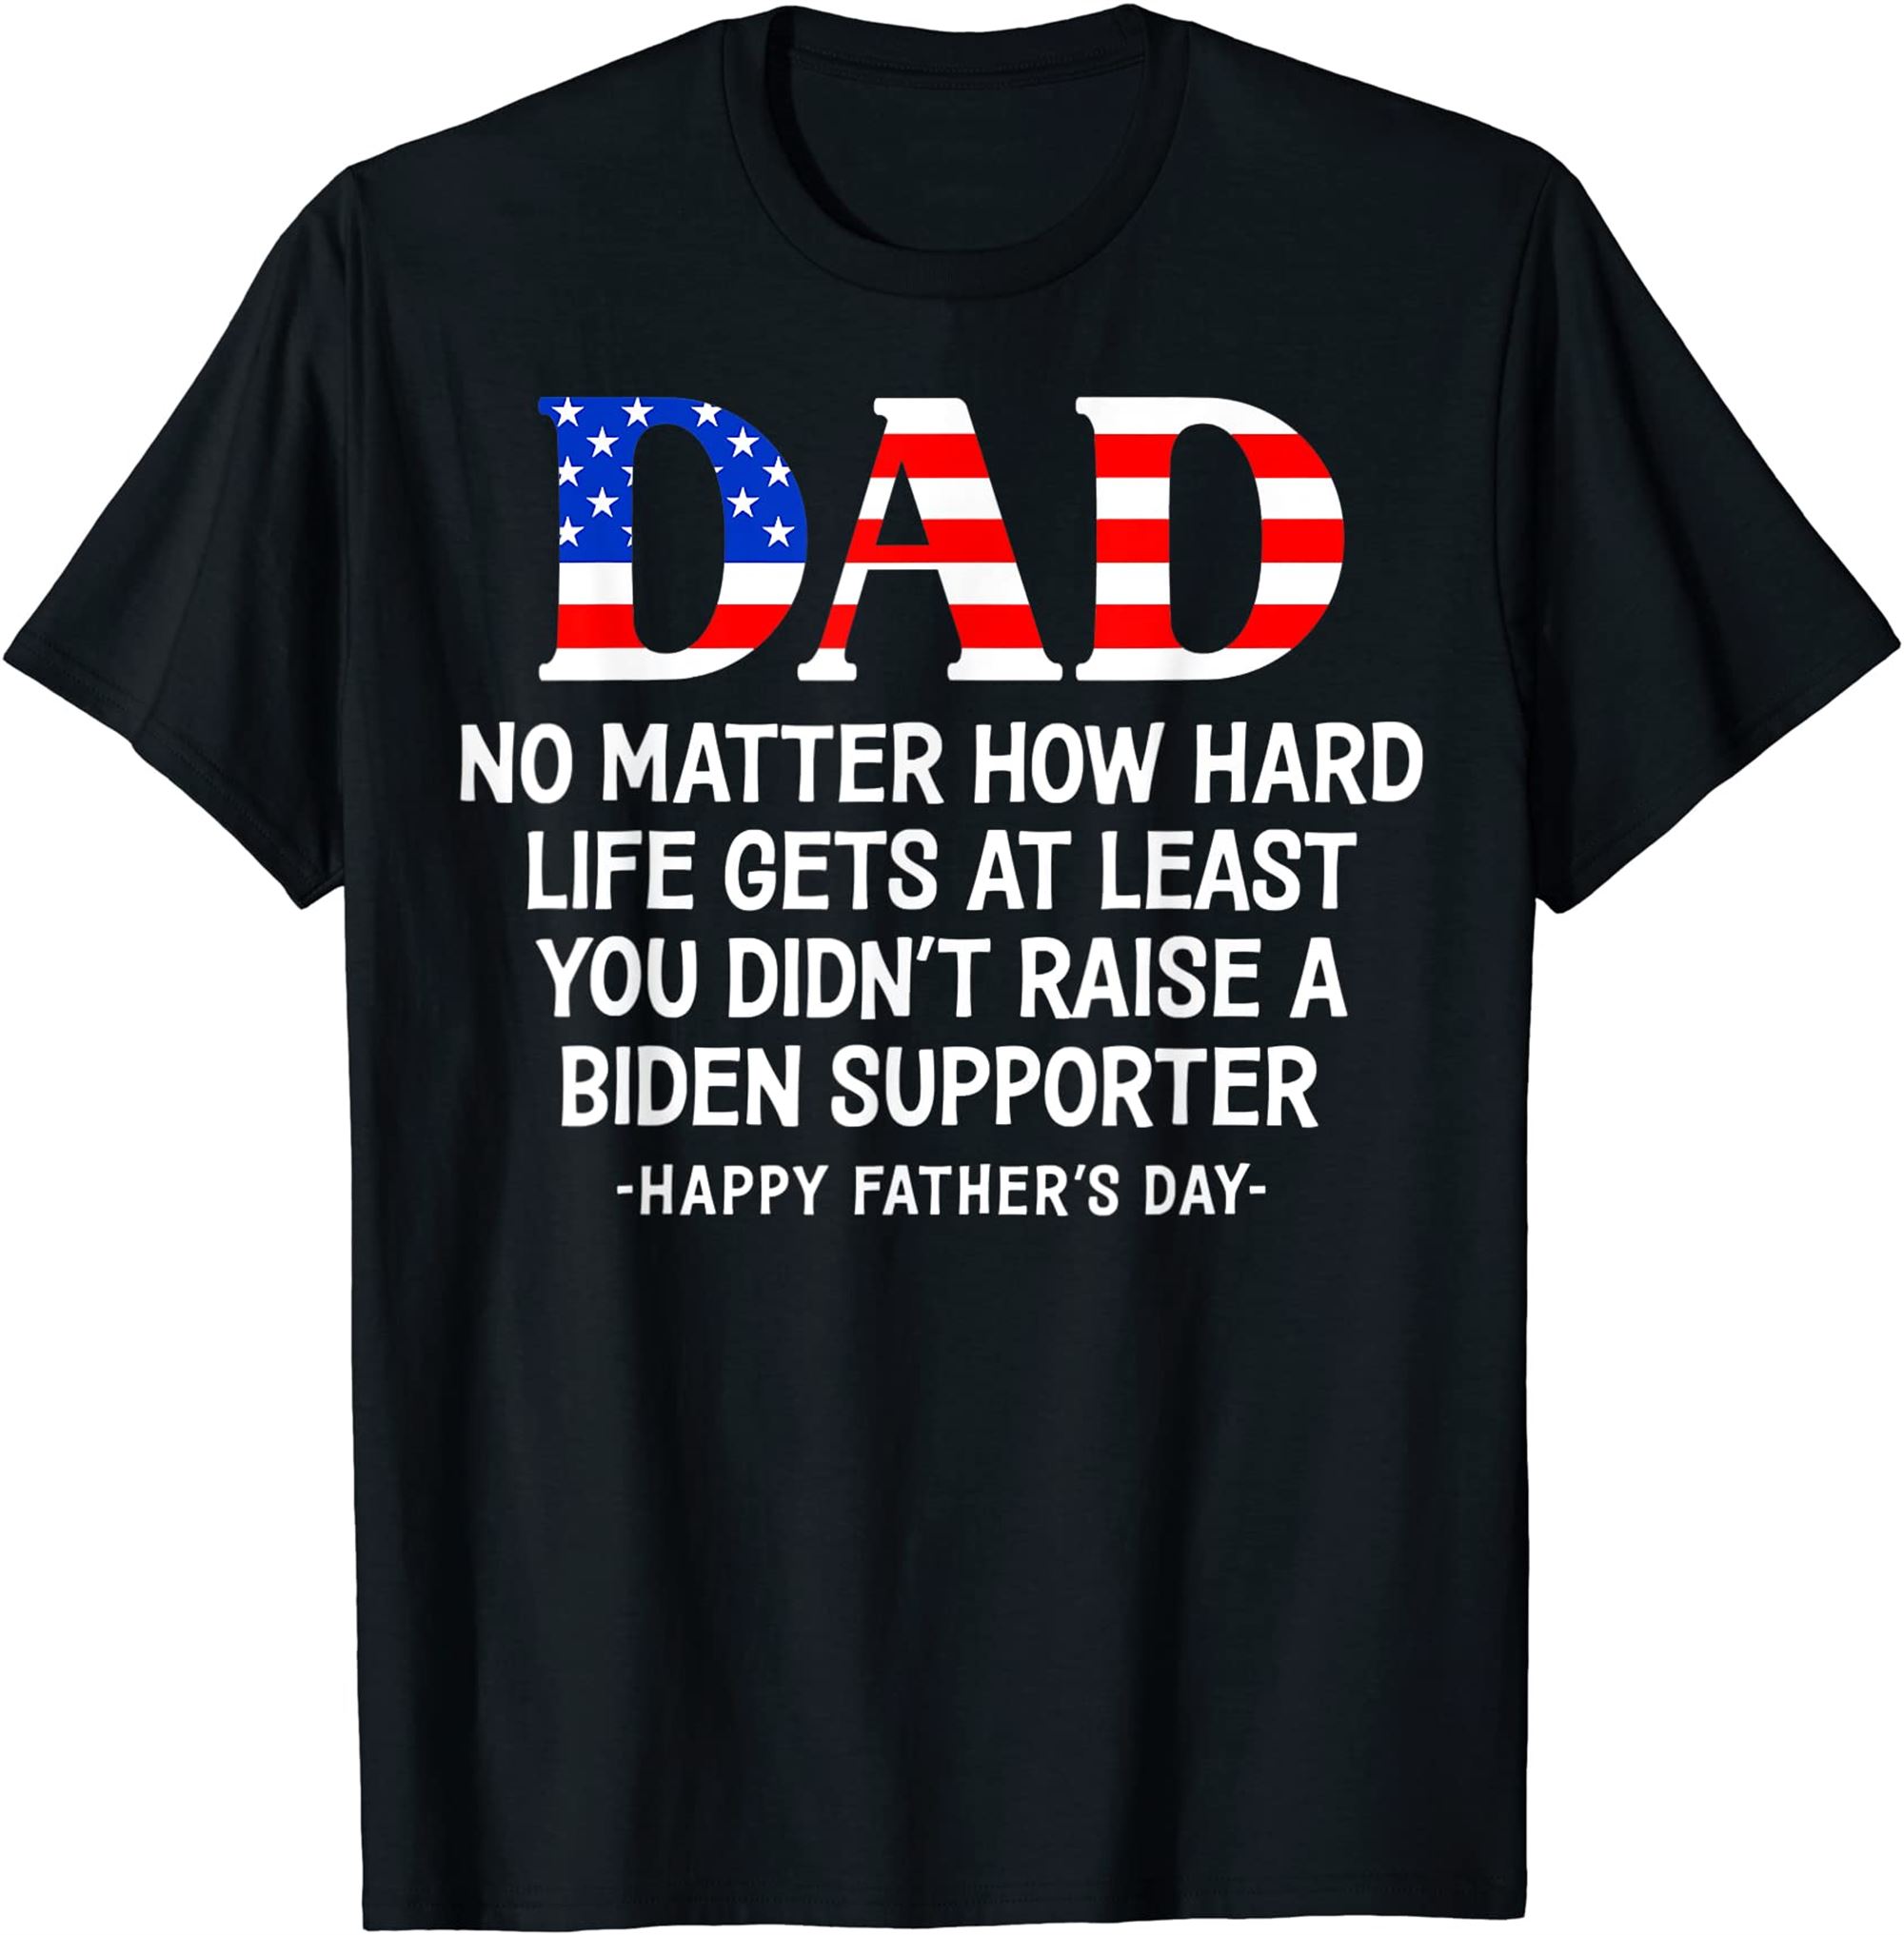 Dad Fathers Day At Least You Didnt Raise A Biden Supporter T-shirt Size Up To 5xl